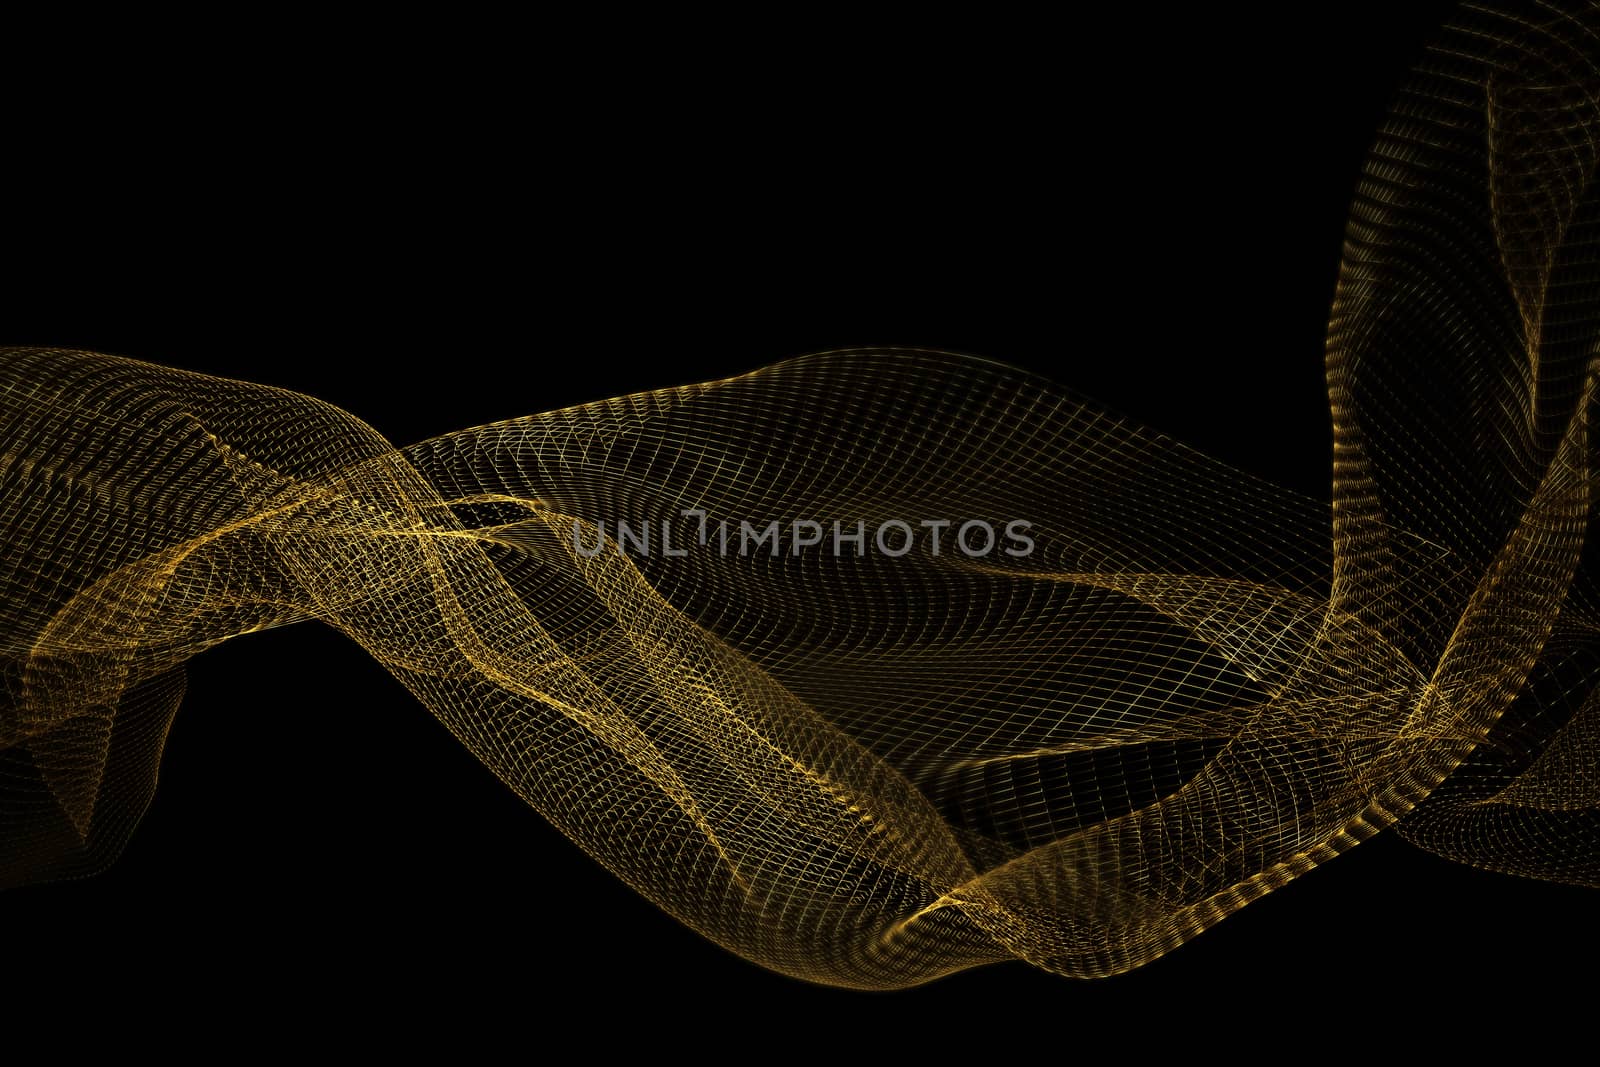 Wireframe fabric on black background 3D render by Myimagine